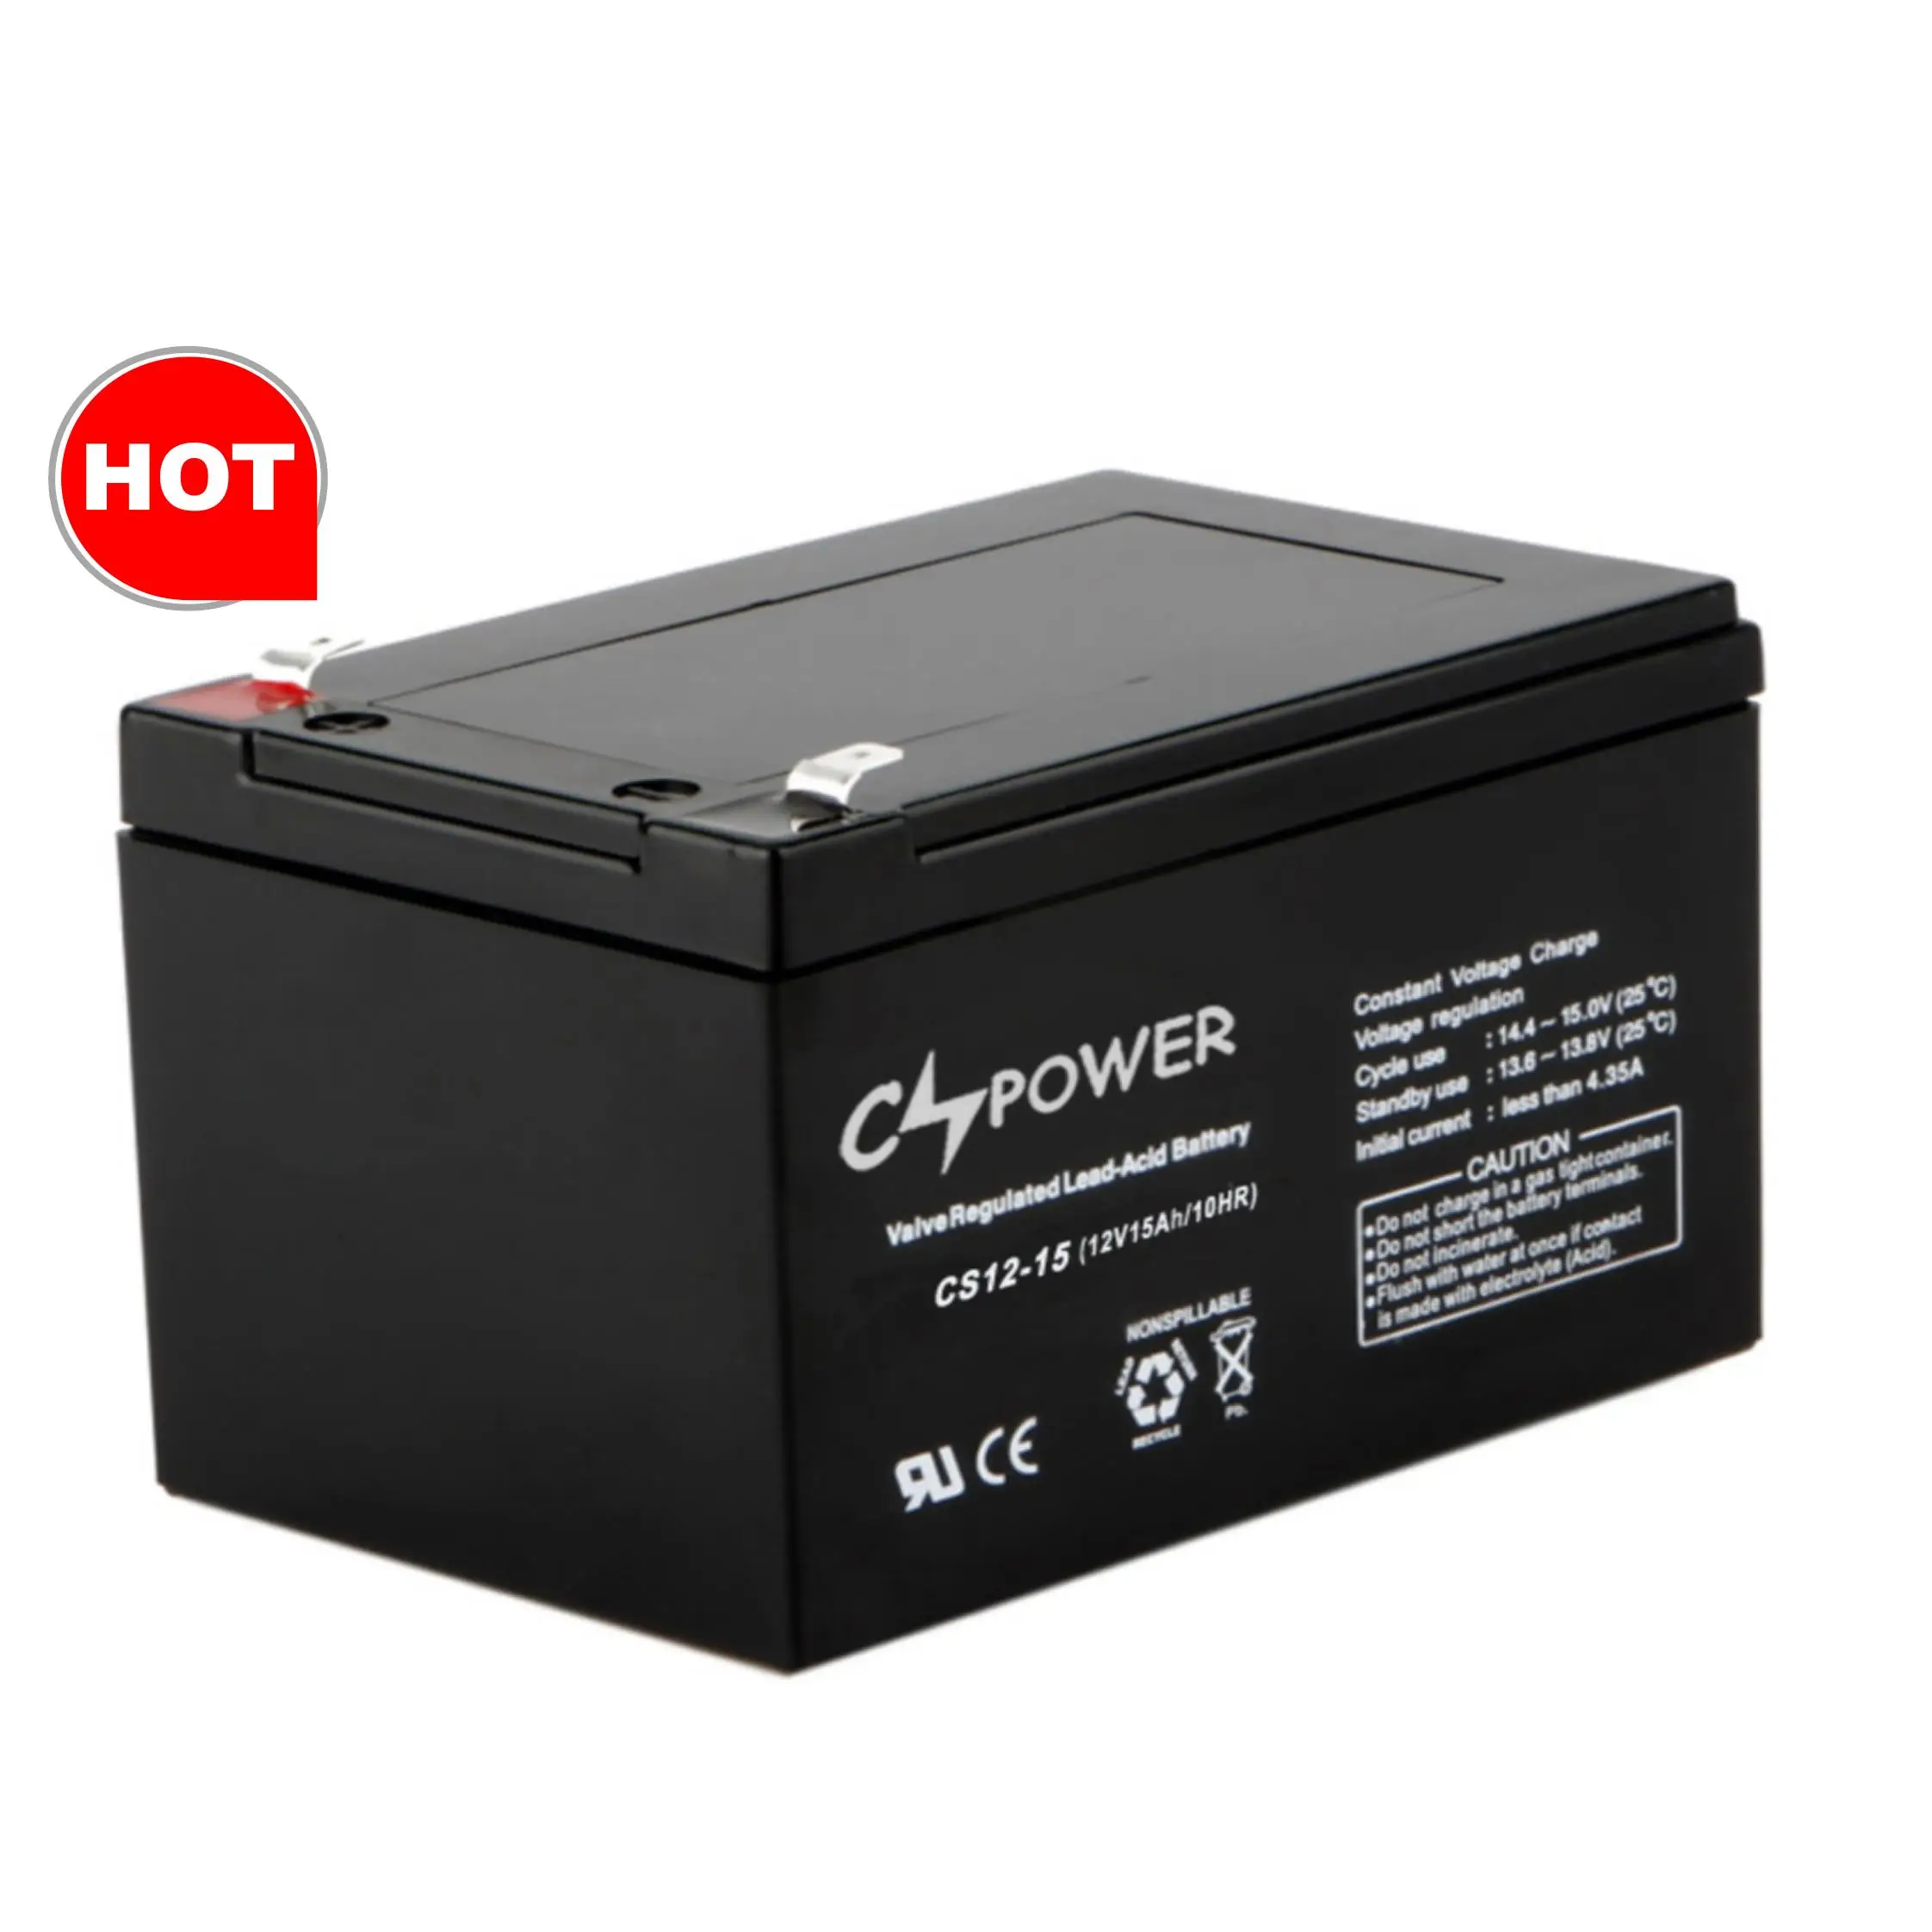 Source CSPower Super Capacitor Rechargeable 12 Volts 48V Scooter Battery 15Ah For Forklift on m.alibaba.com